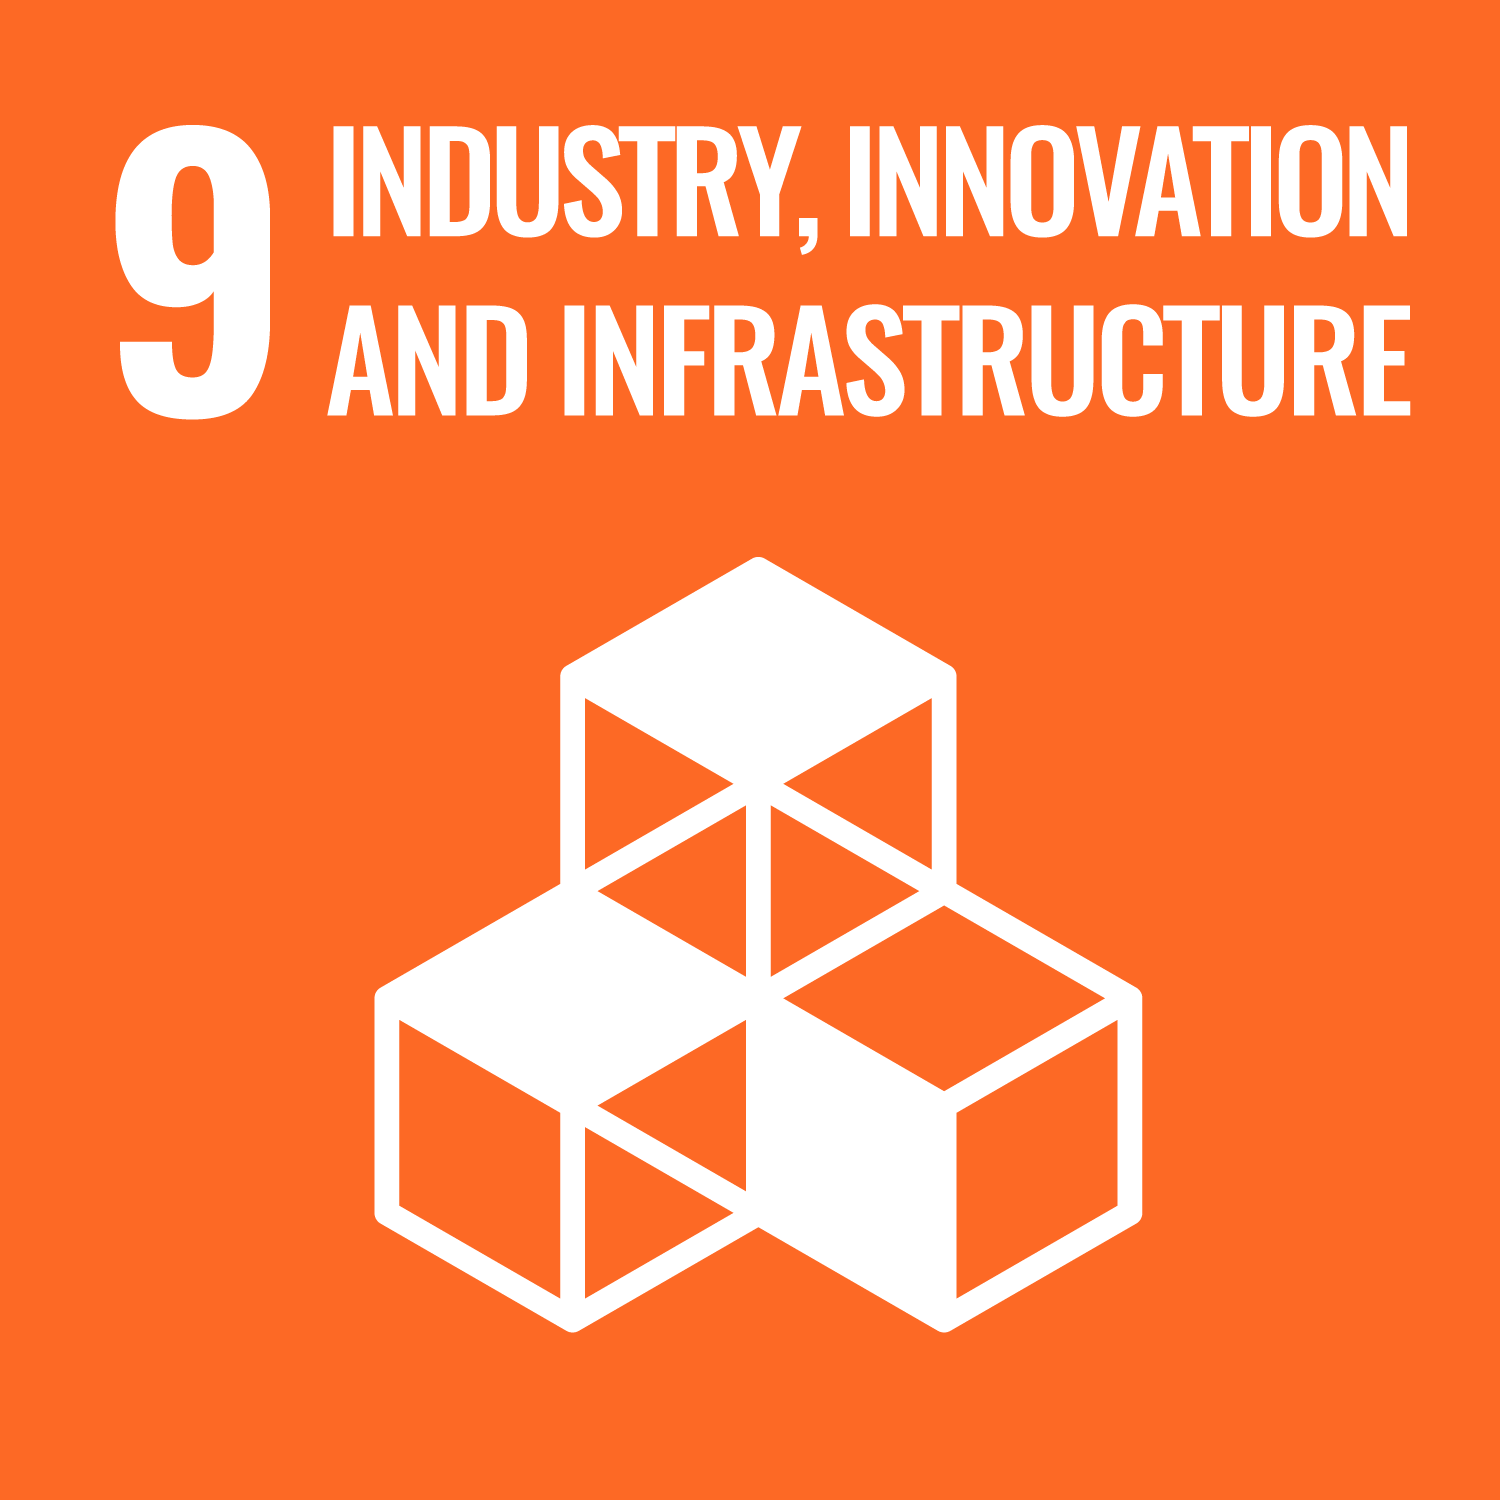 UN Sustainable Development Goals Number 9 Industry, Innovation and Infrastructure